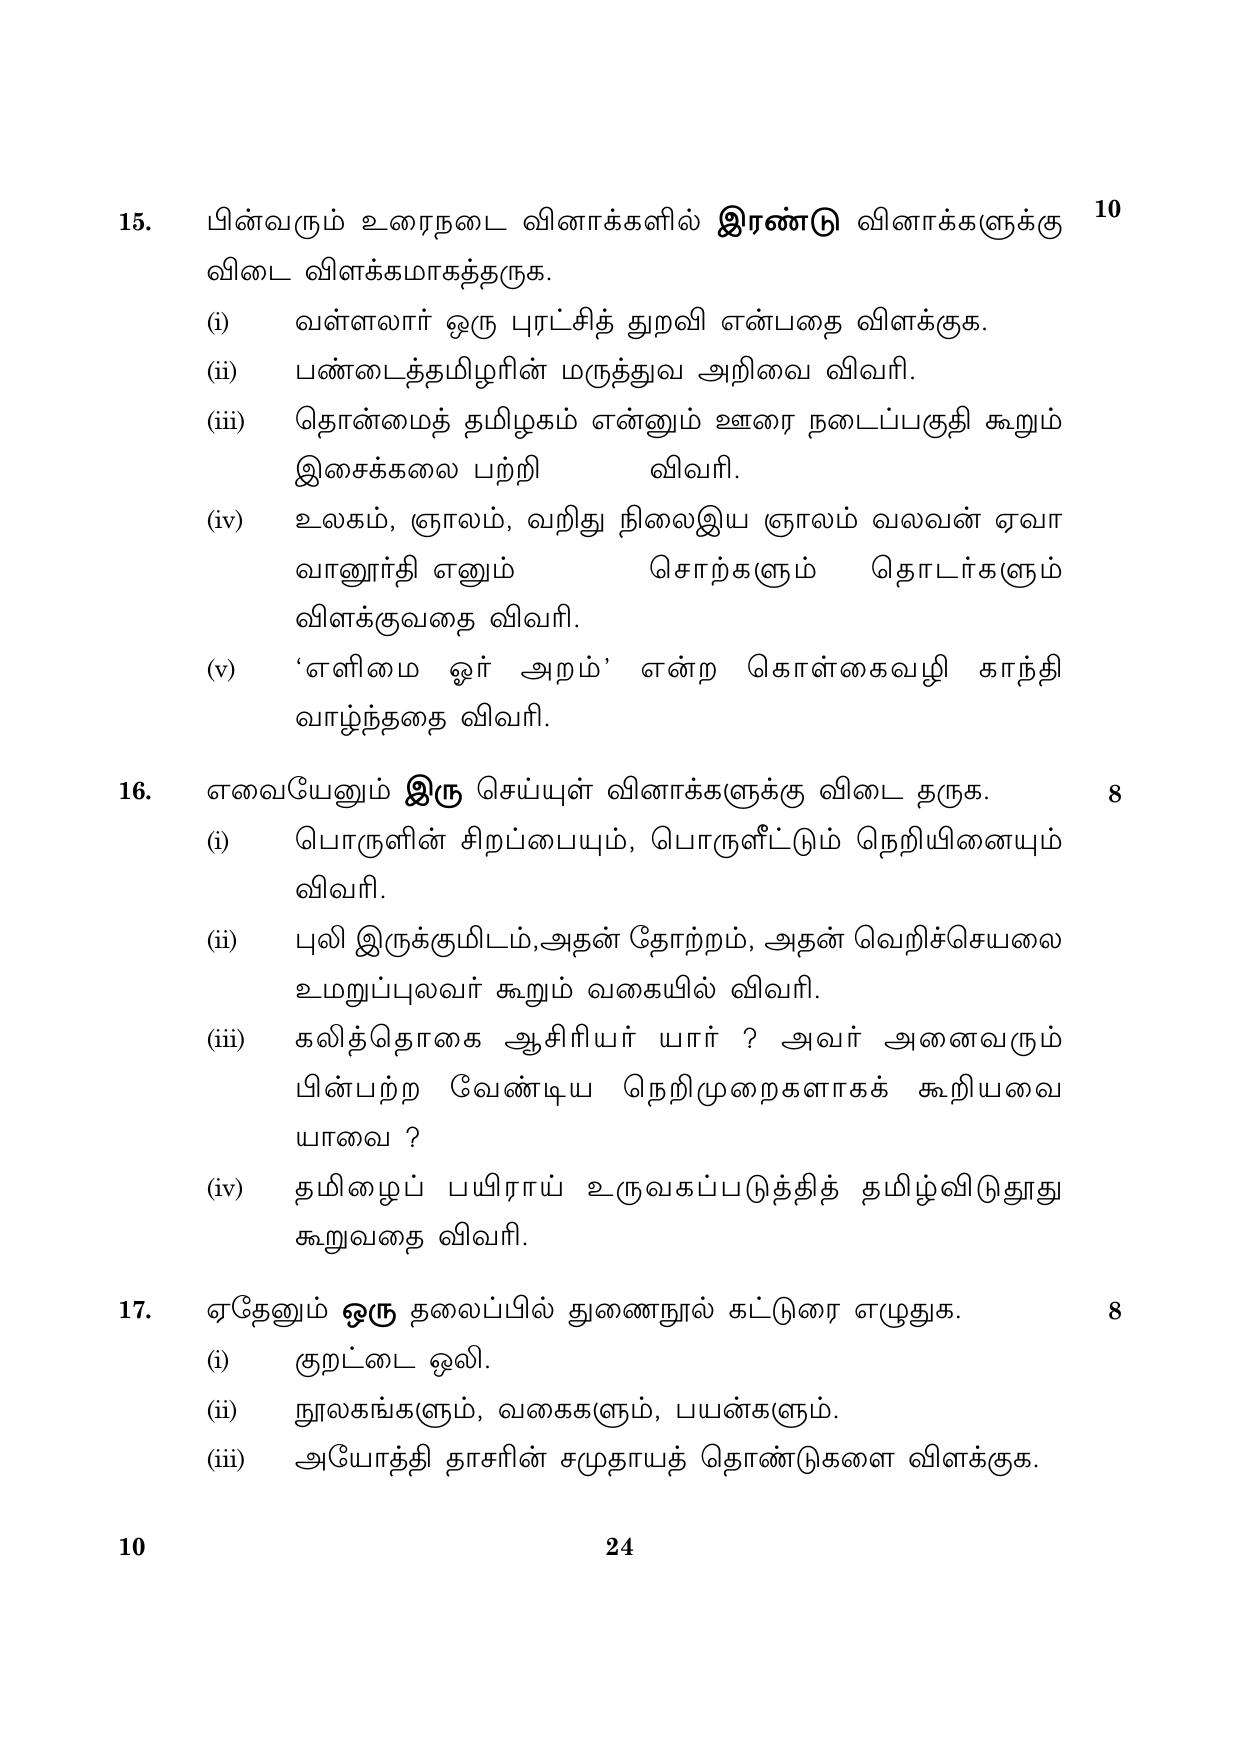 CBSE Class 10 010 Tamil 2016 Question Paper - Page 24